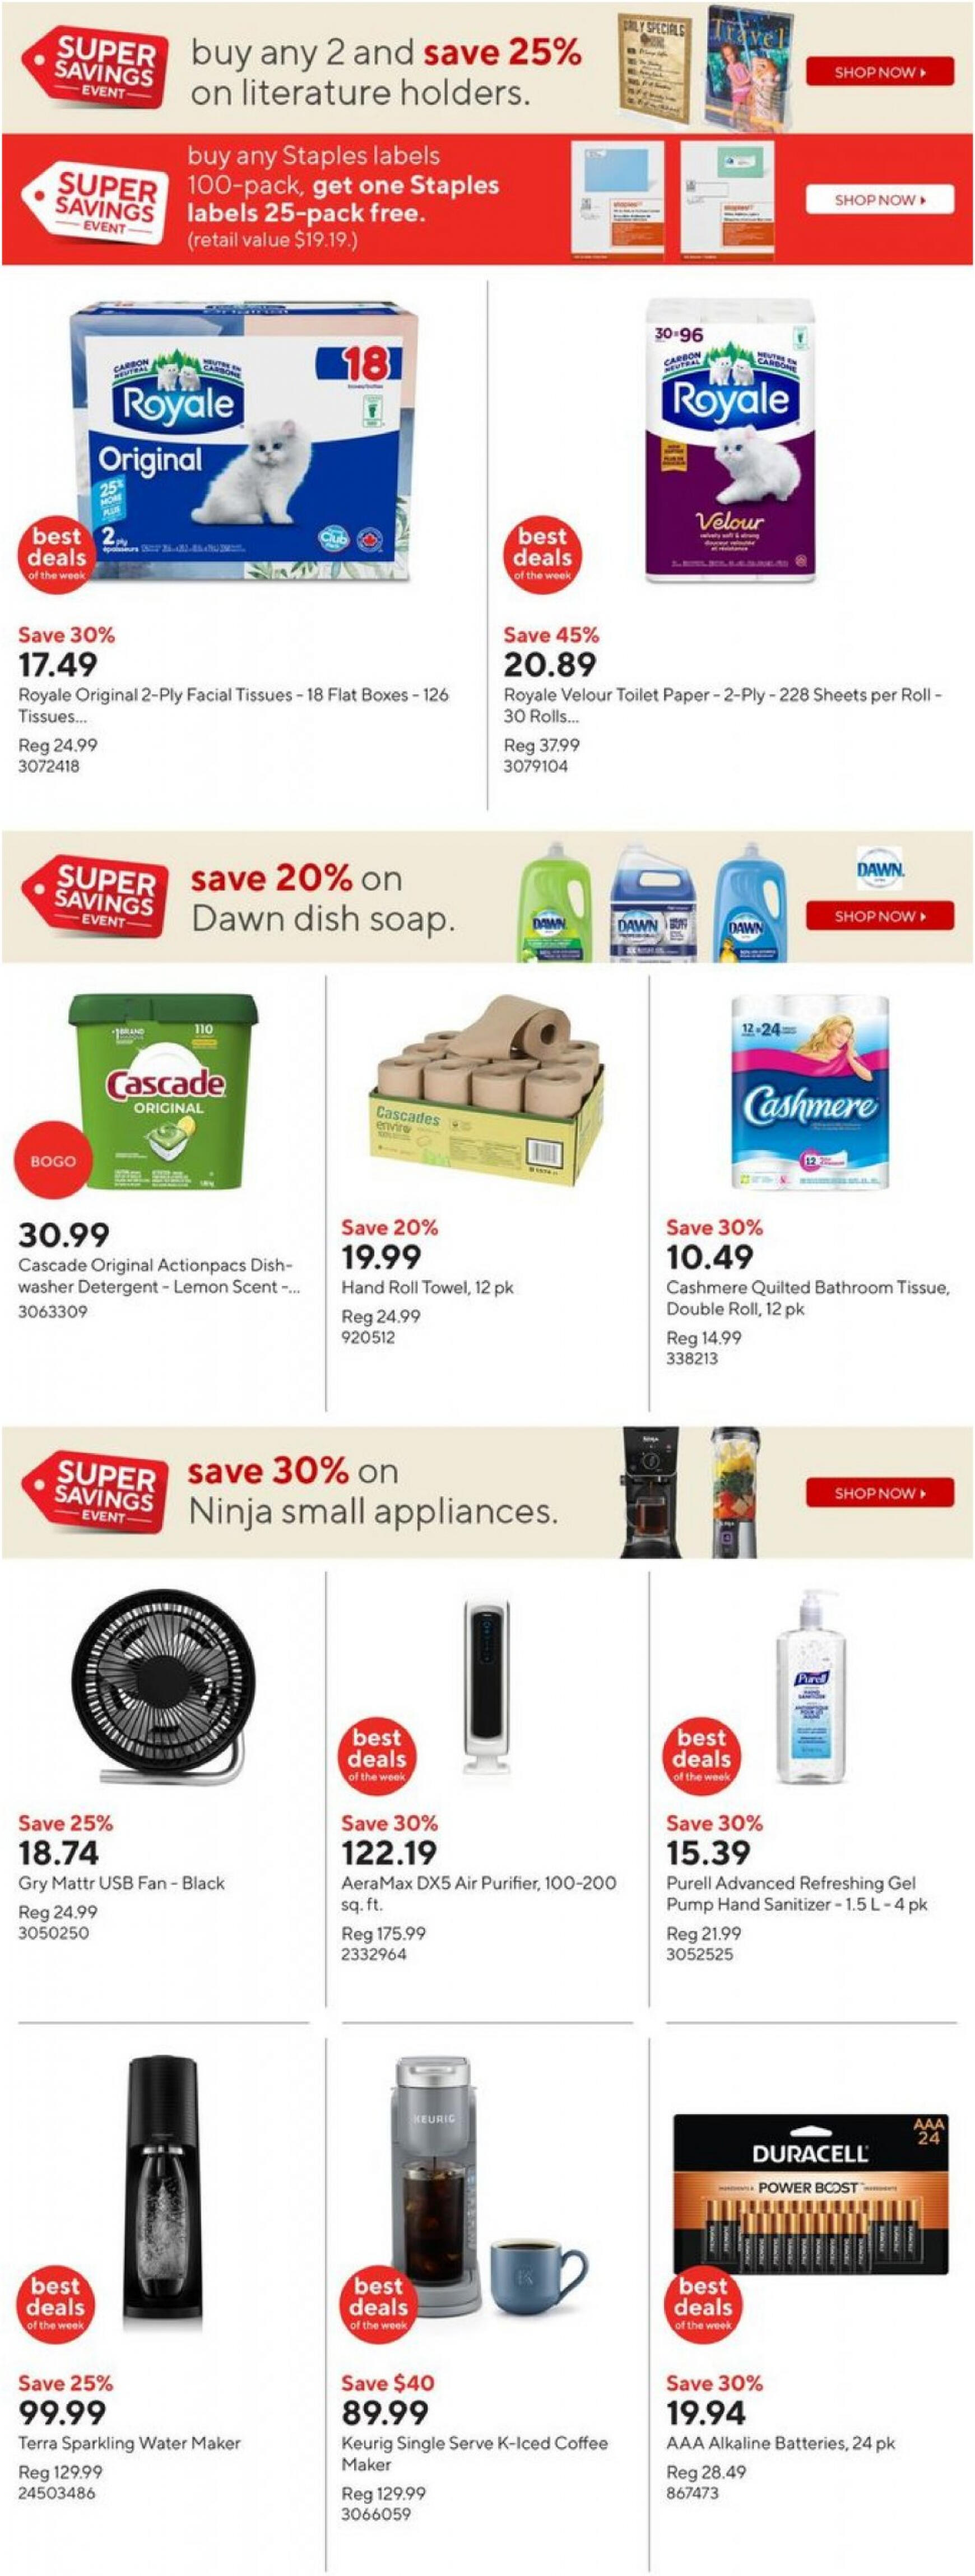 staples - Staples - Weekly flyer current 01.05. - 08.05. - page: 6